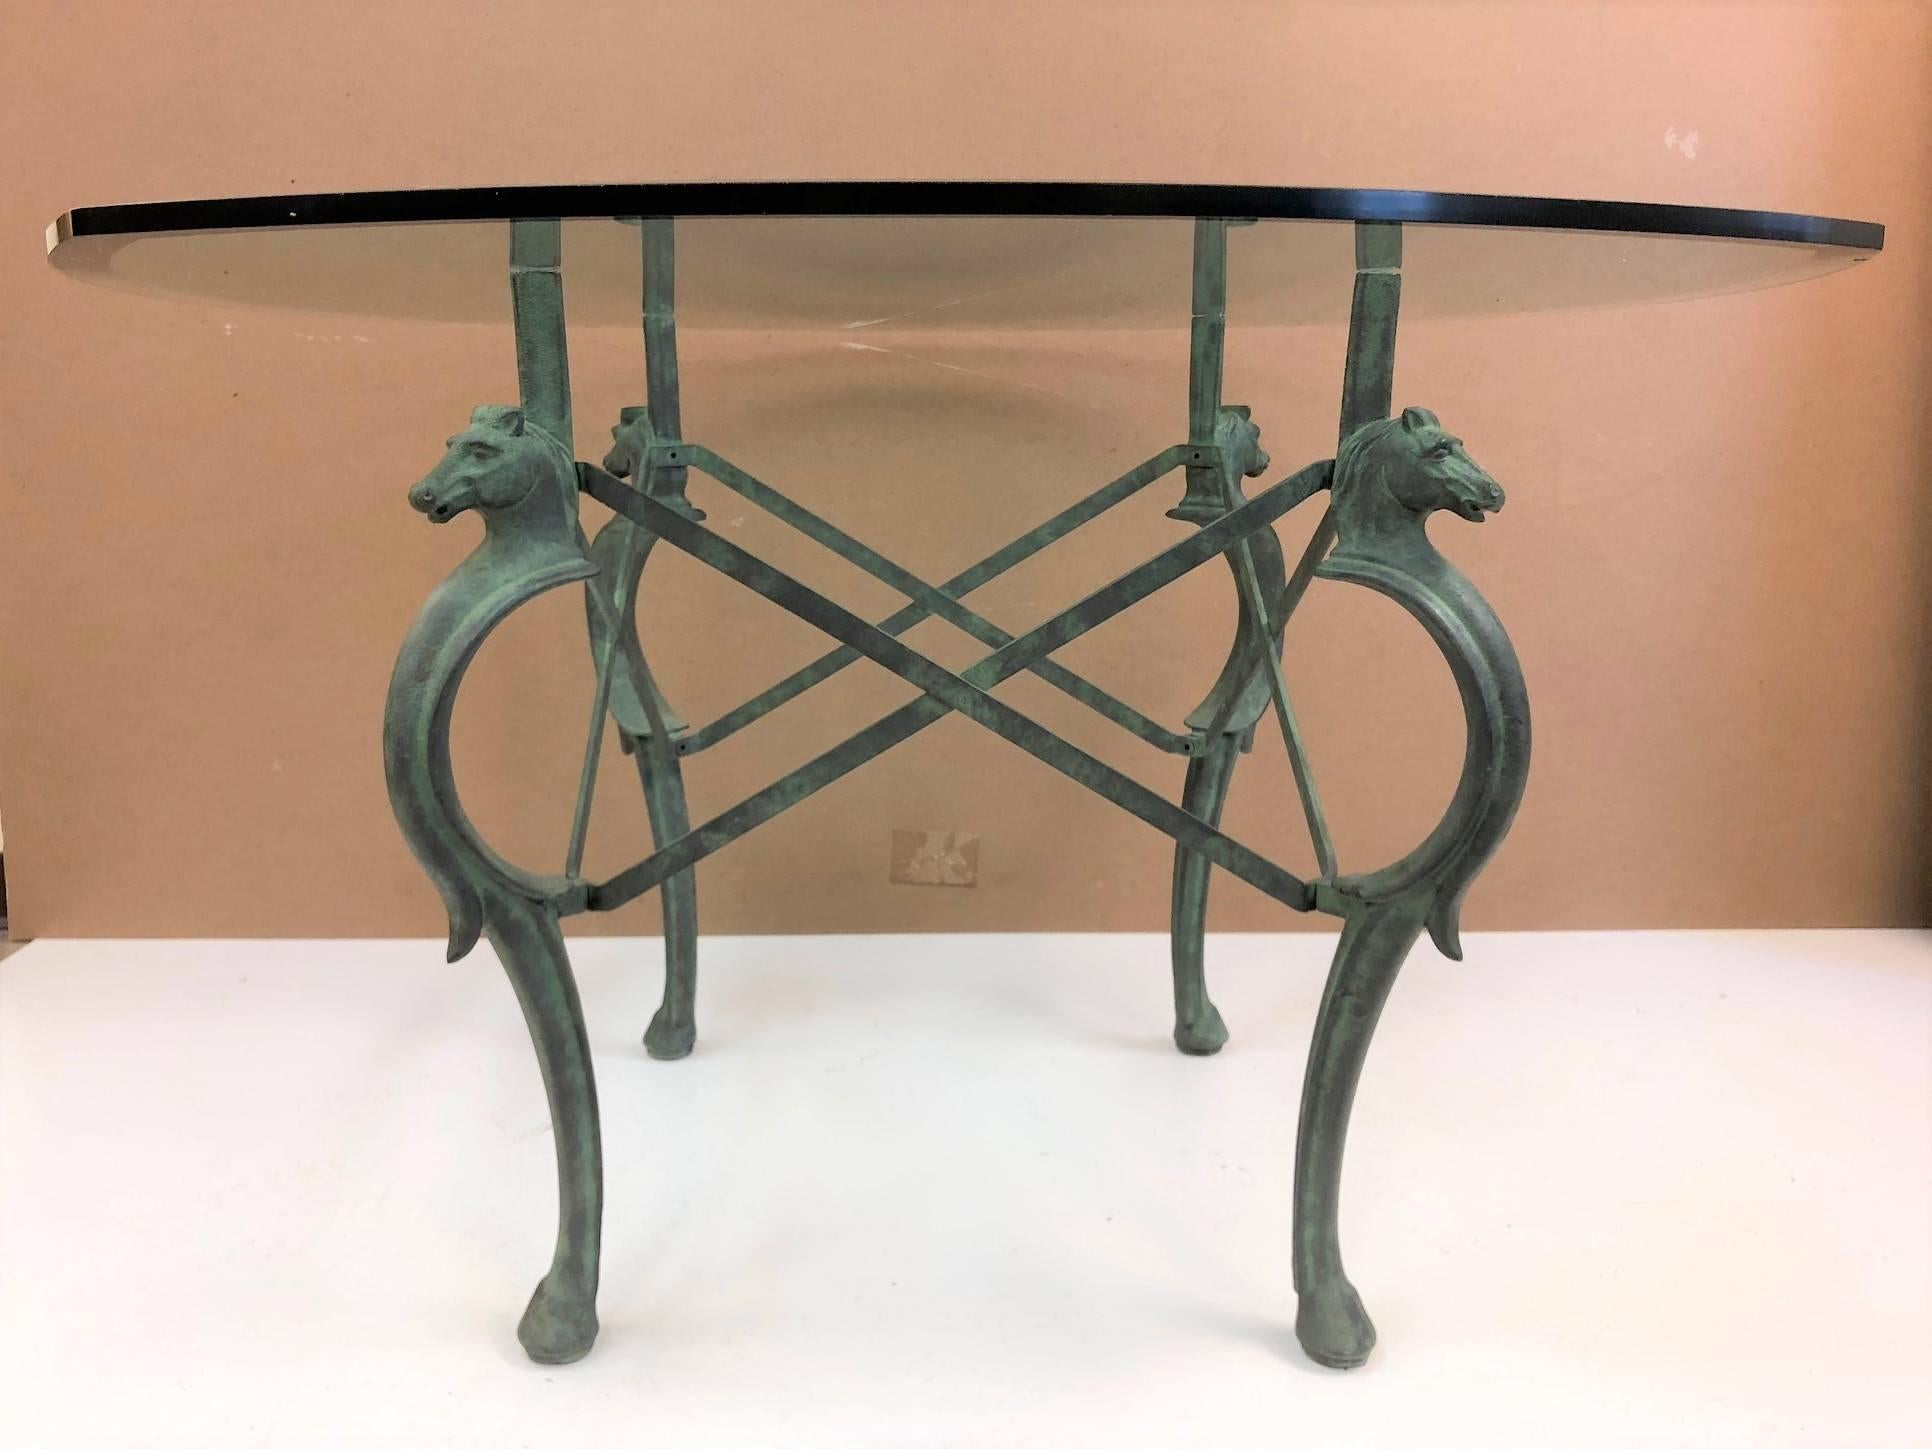 French style hand-forged patinated iron seahorse table. The table has a four-sided curved bevelled edge glass top. This table can be used for indoor or outdoor use.